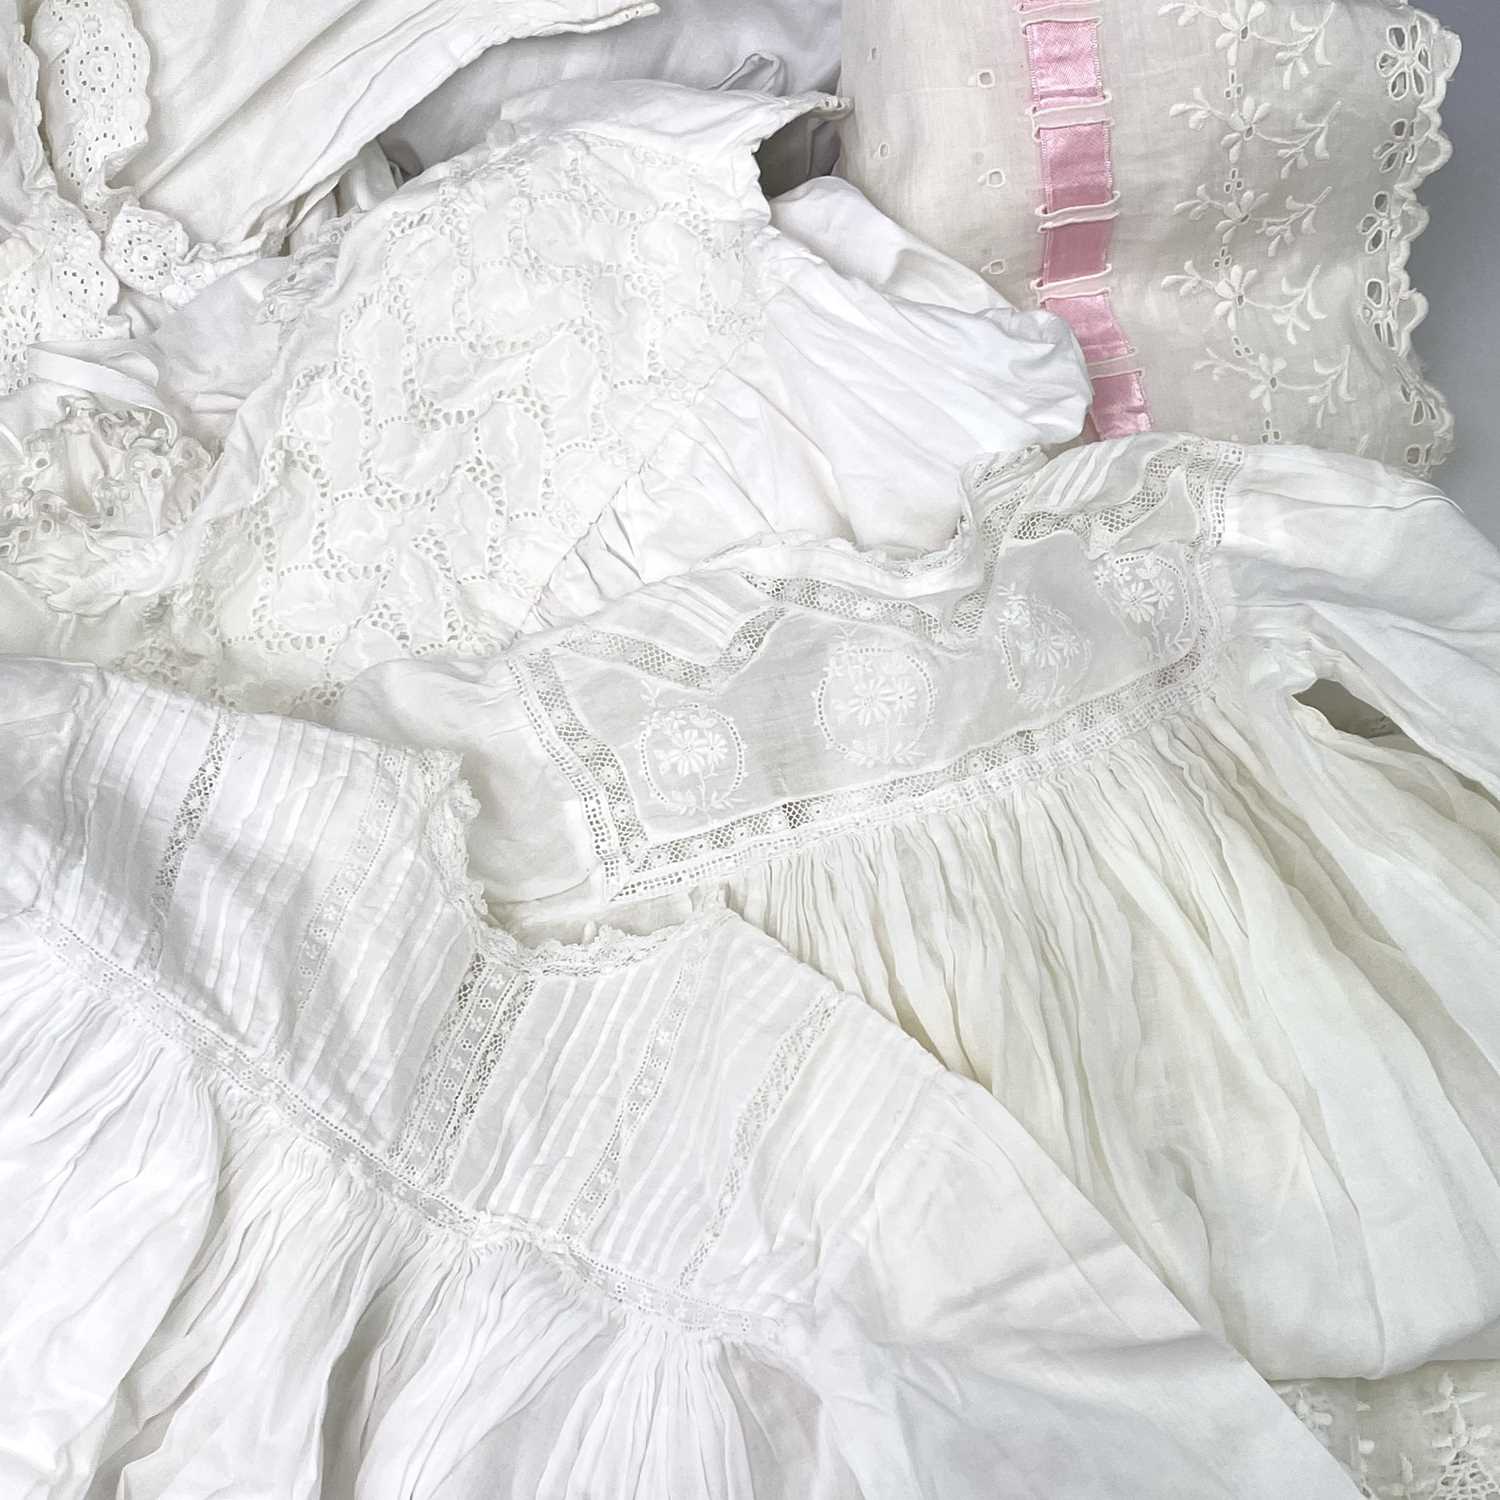 An early 20th century child's nightgown together with four other christening robes and nightgown and - Image 4 of 4